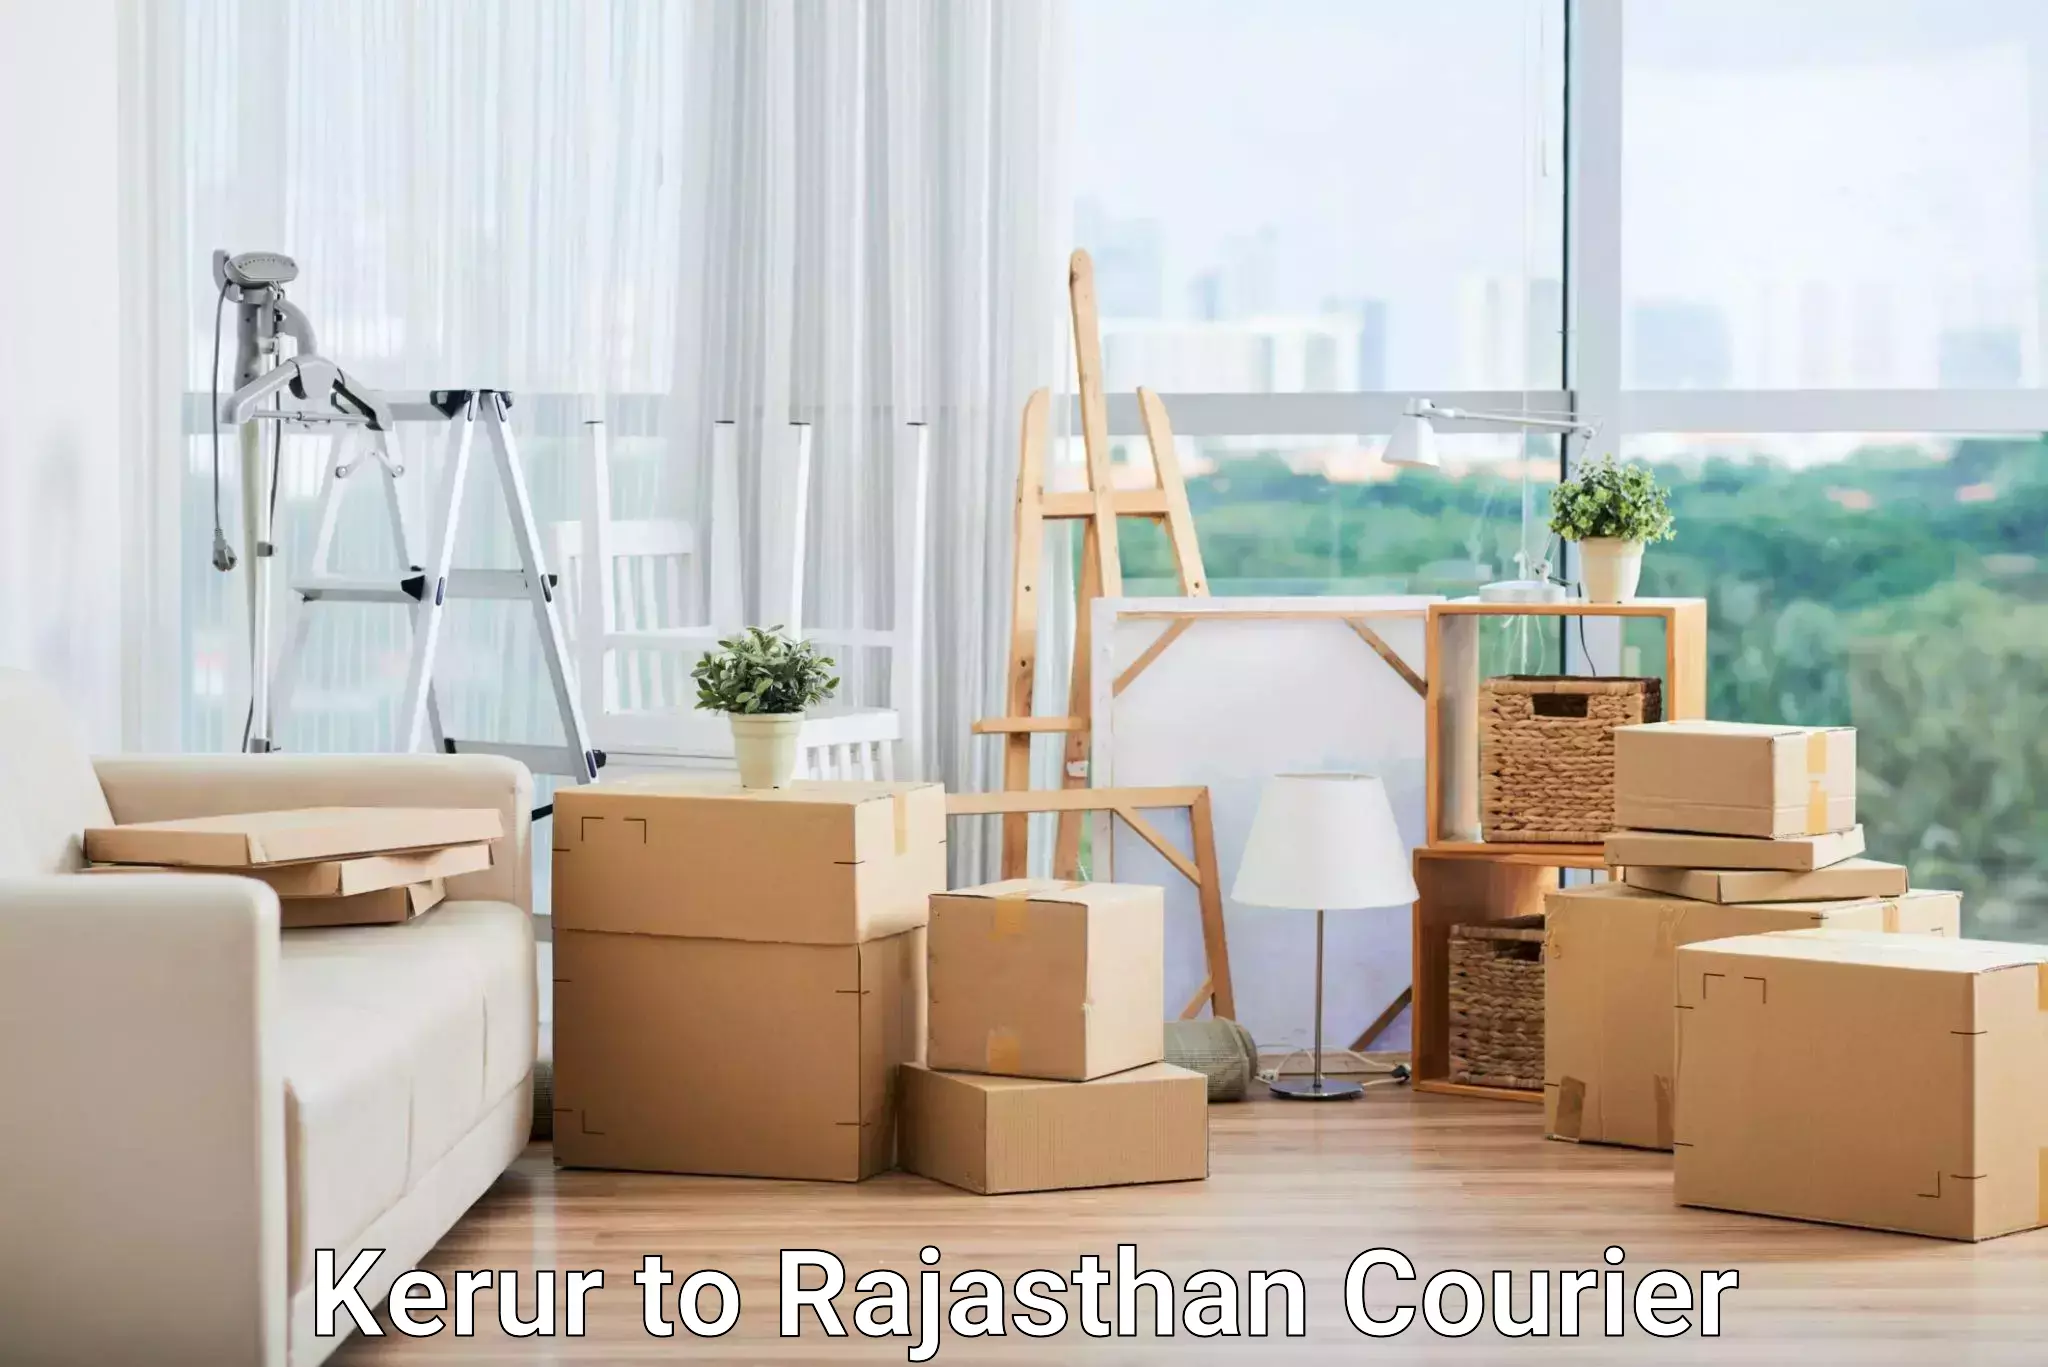 Courier service booking in Kerur to Jaipur